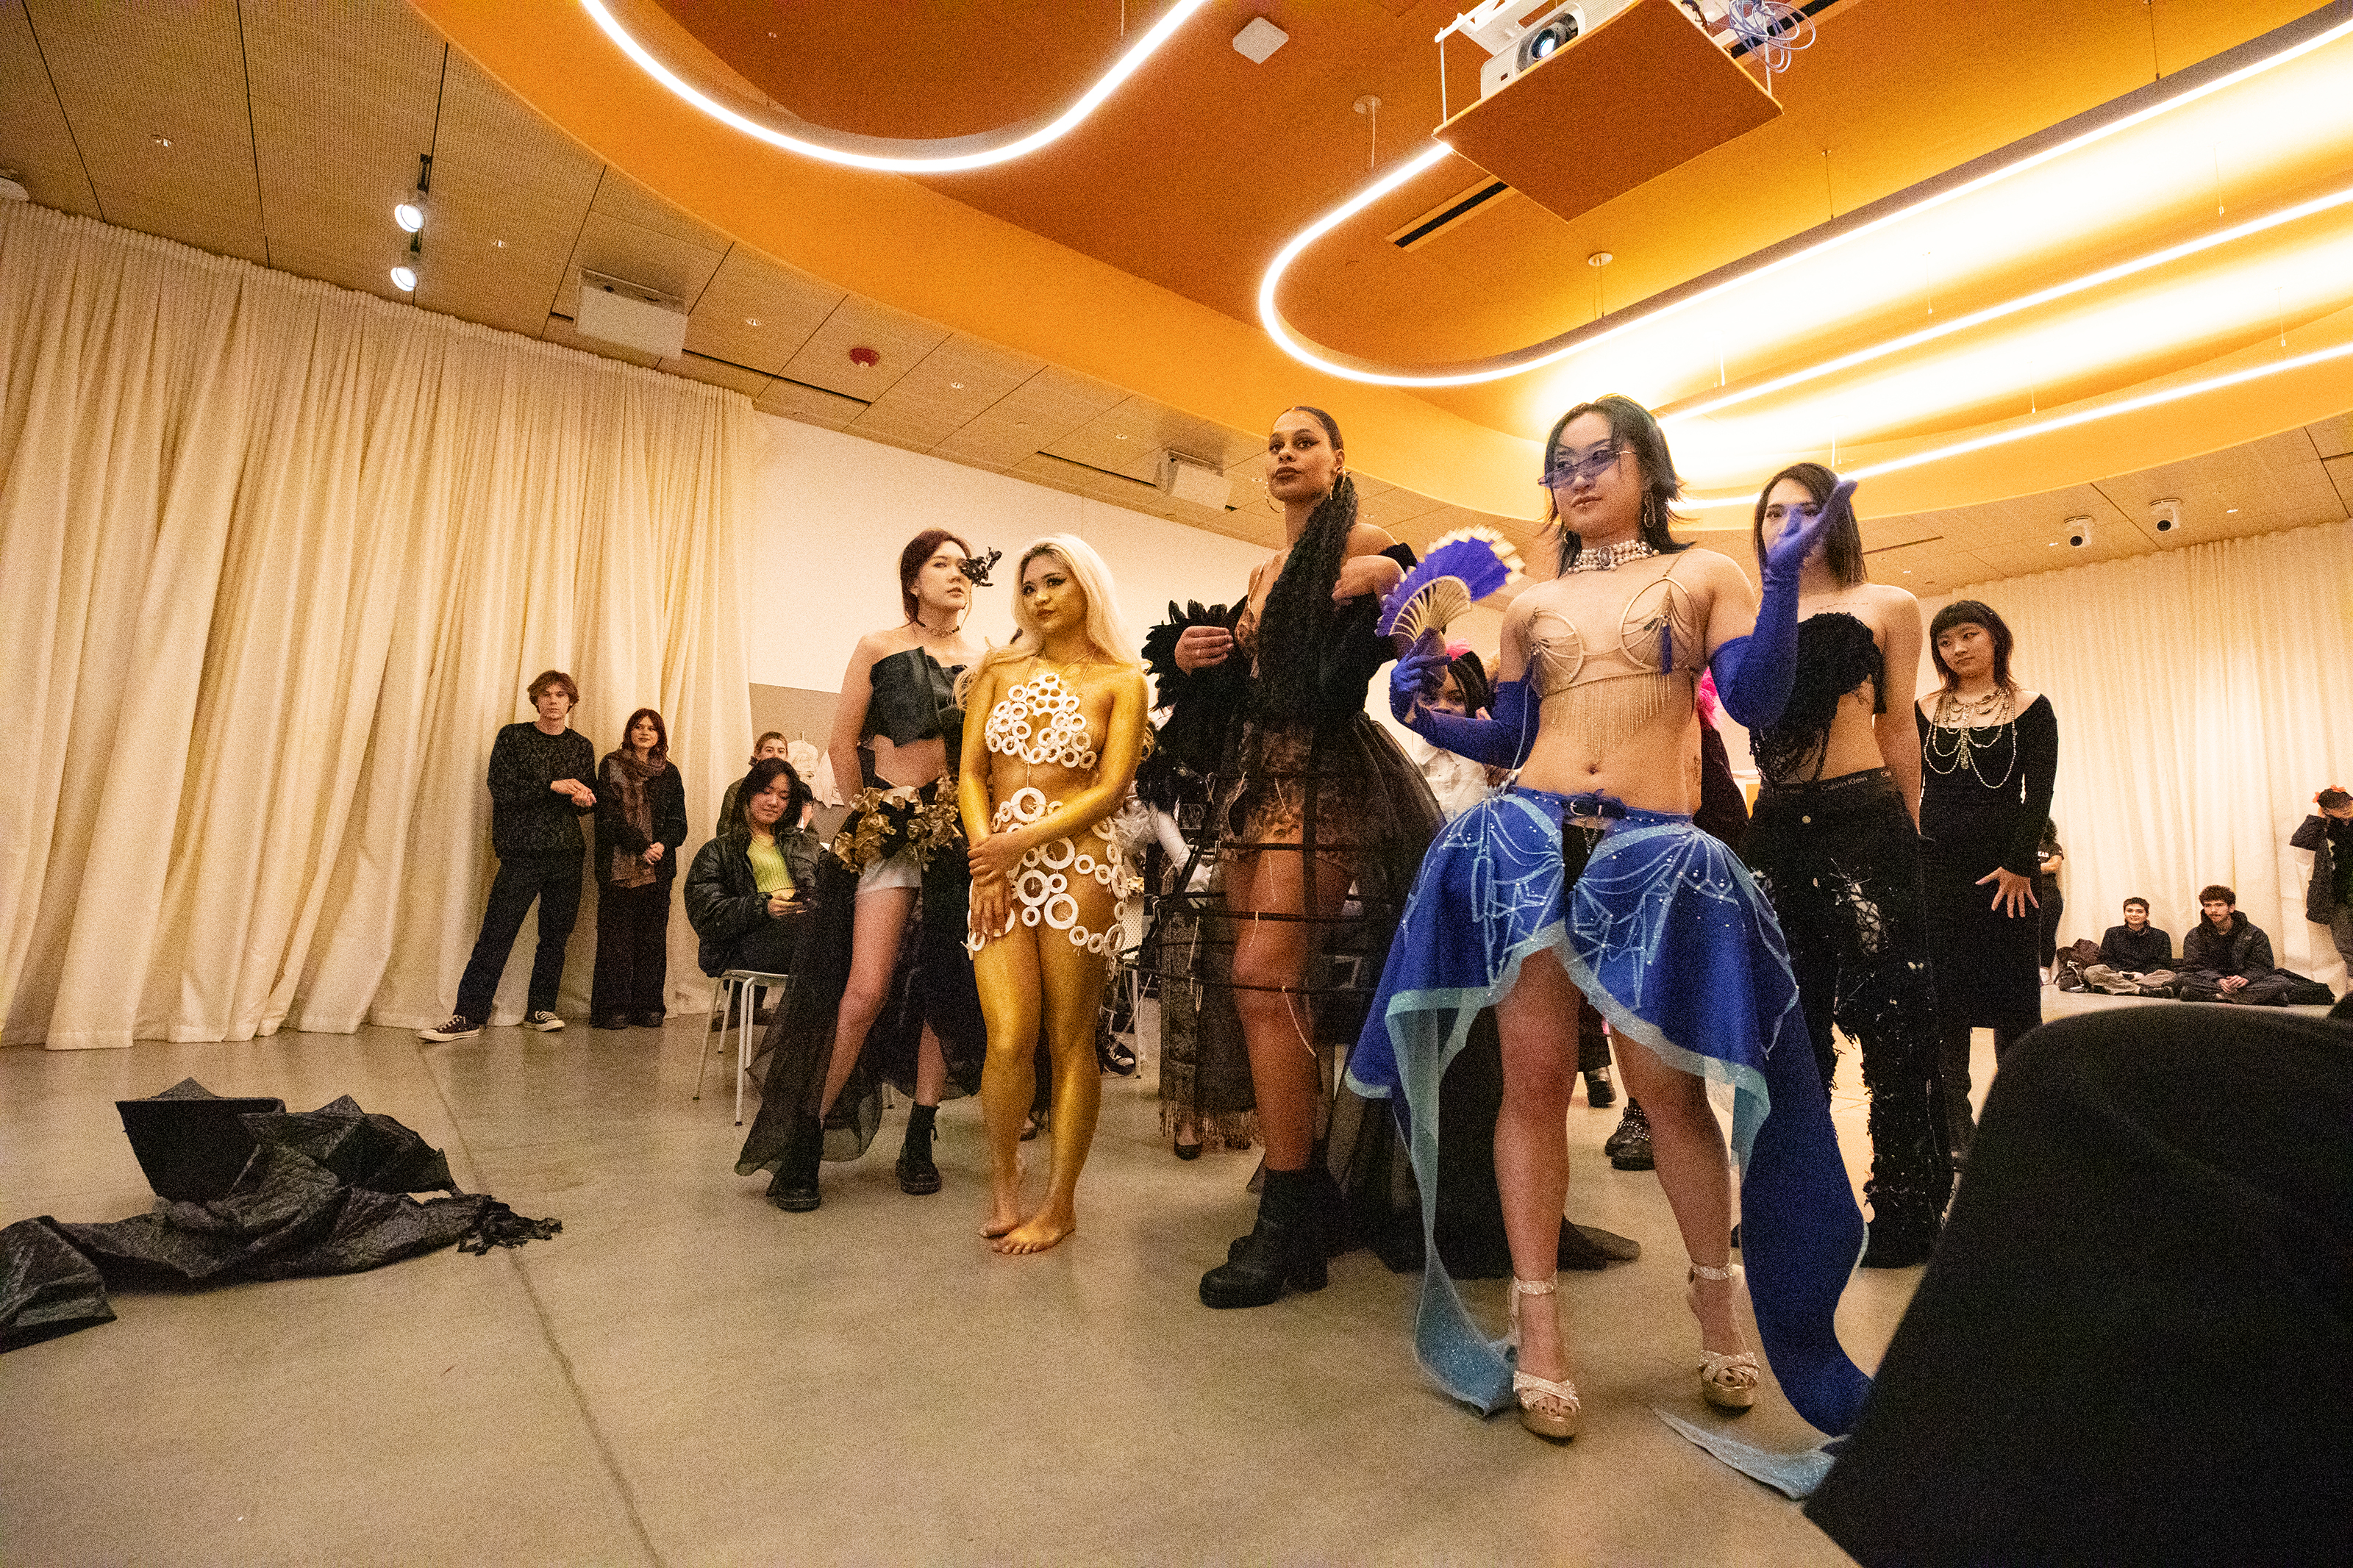 Students and models stand around waiting for awards to be announced at the end of the ball